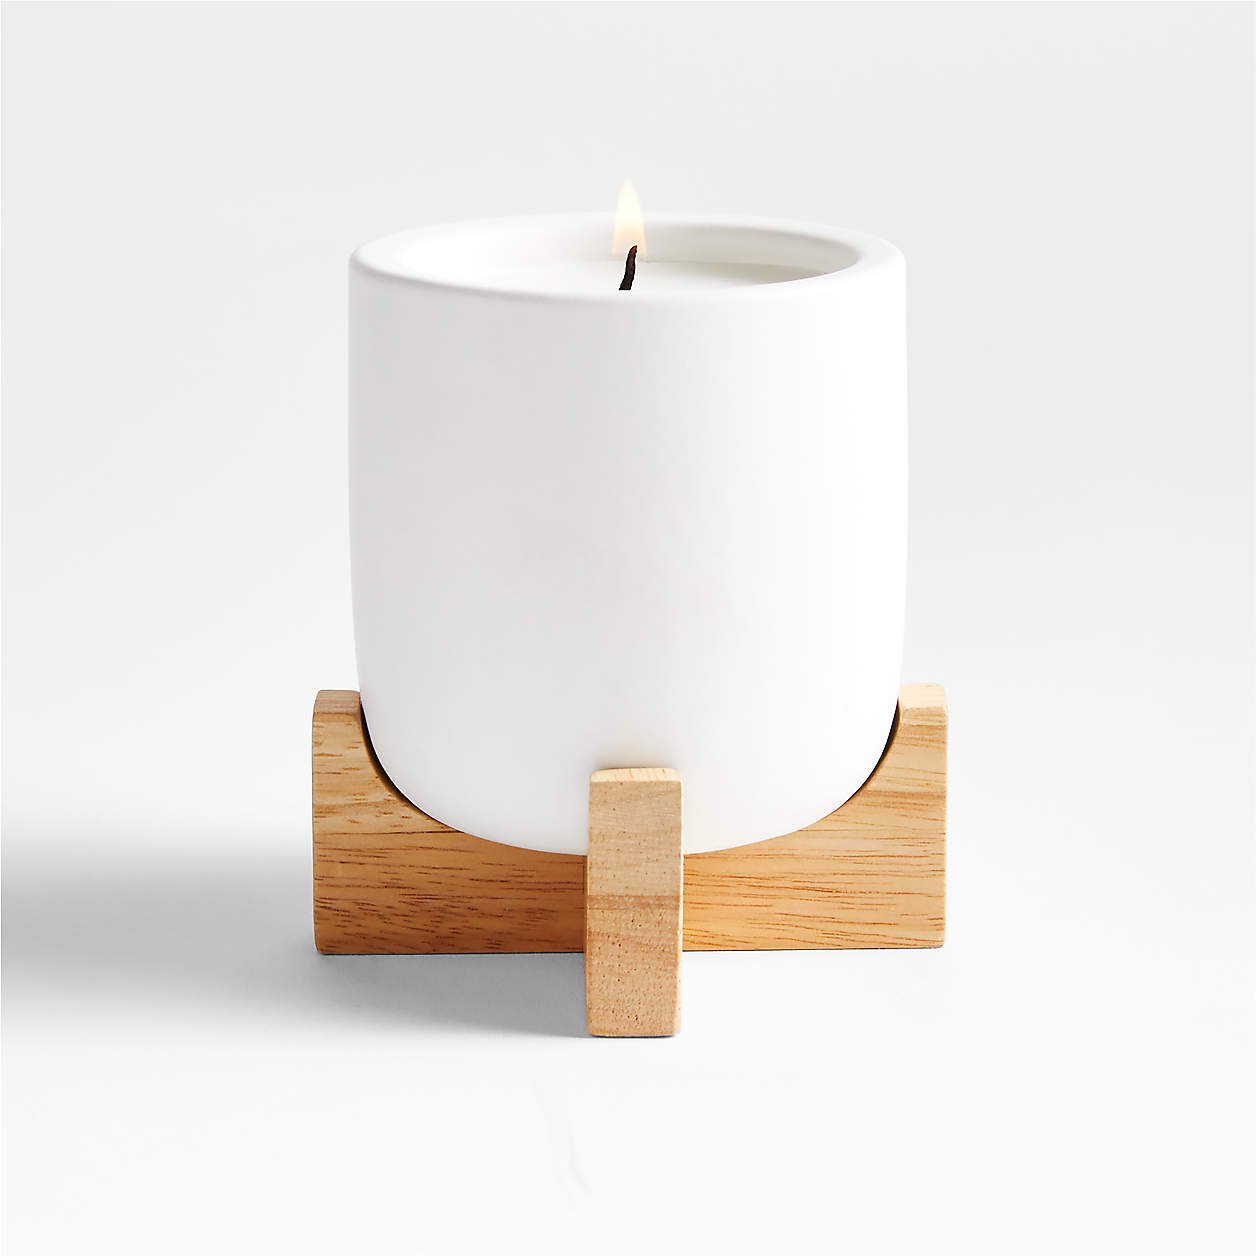 Crate &amp; Barrel - $24.95 - Wilmette 1-Wick Citronella Candle with Wooden Stand